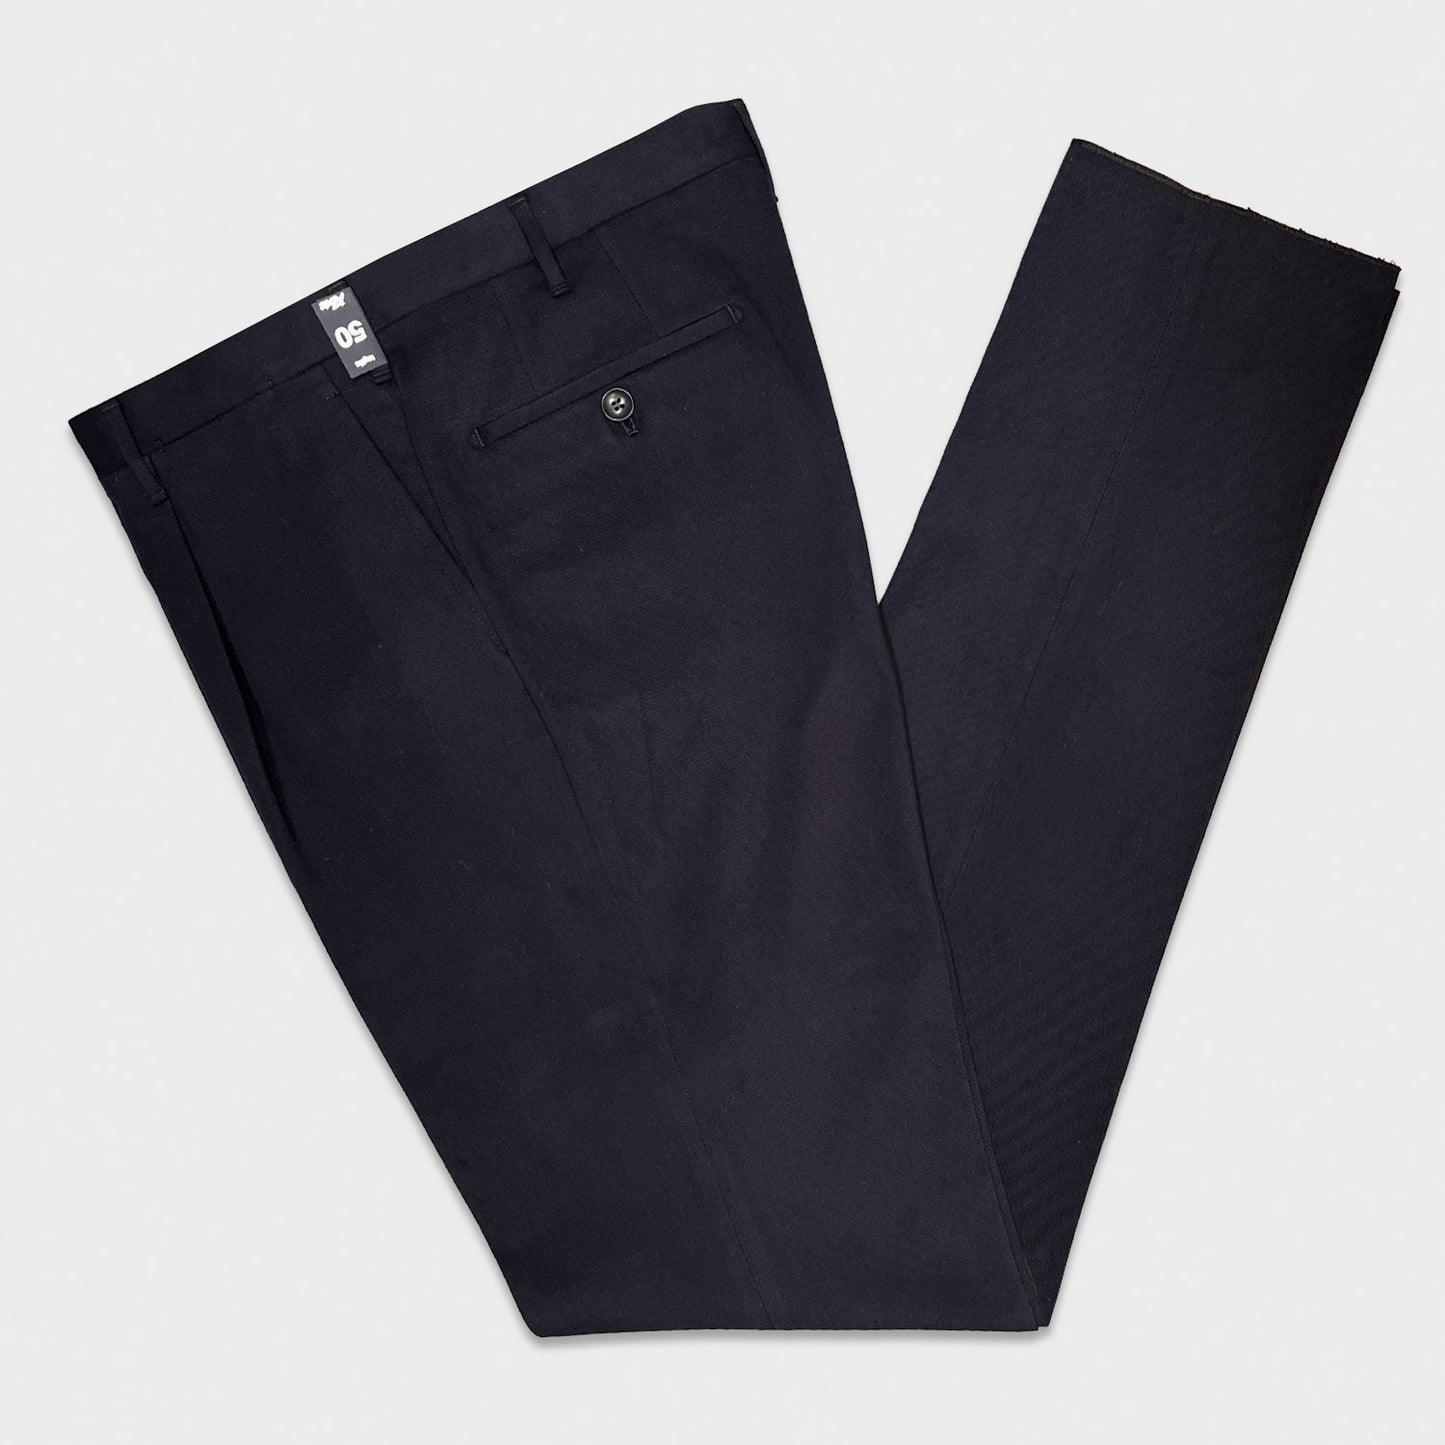 Rota Men's Cotton Twill Trousers Blue-Wools Boutique Uomo